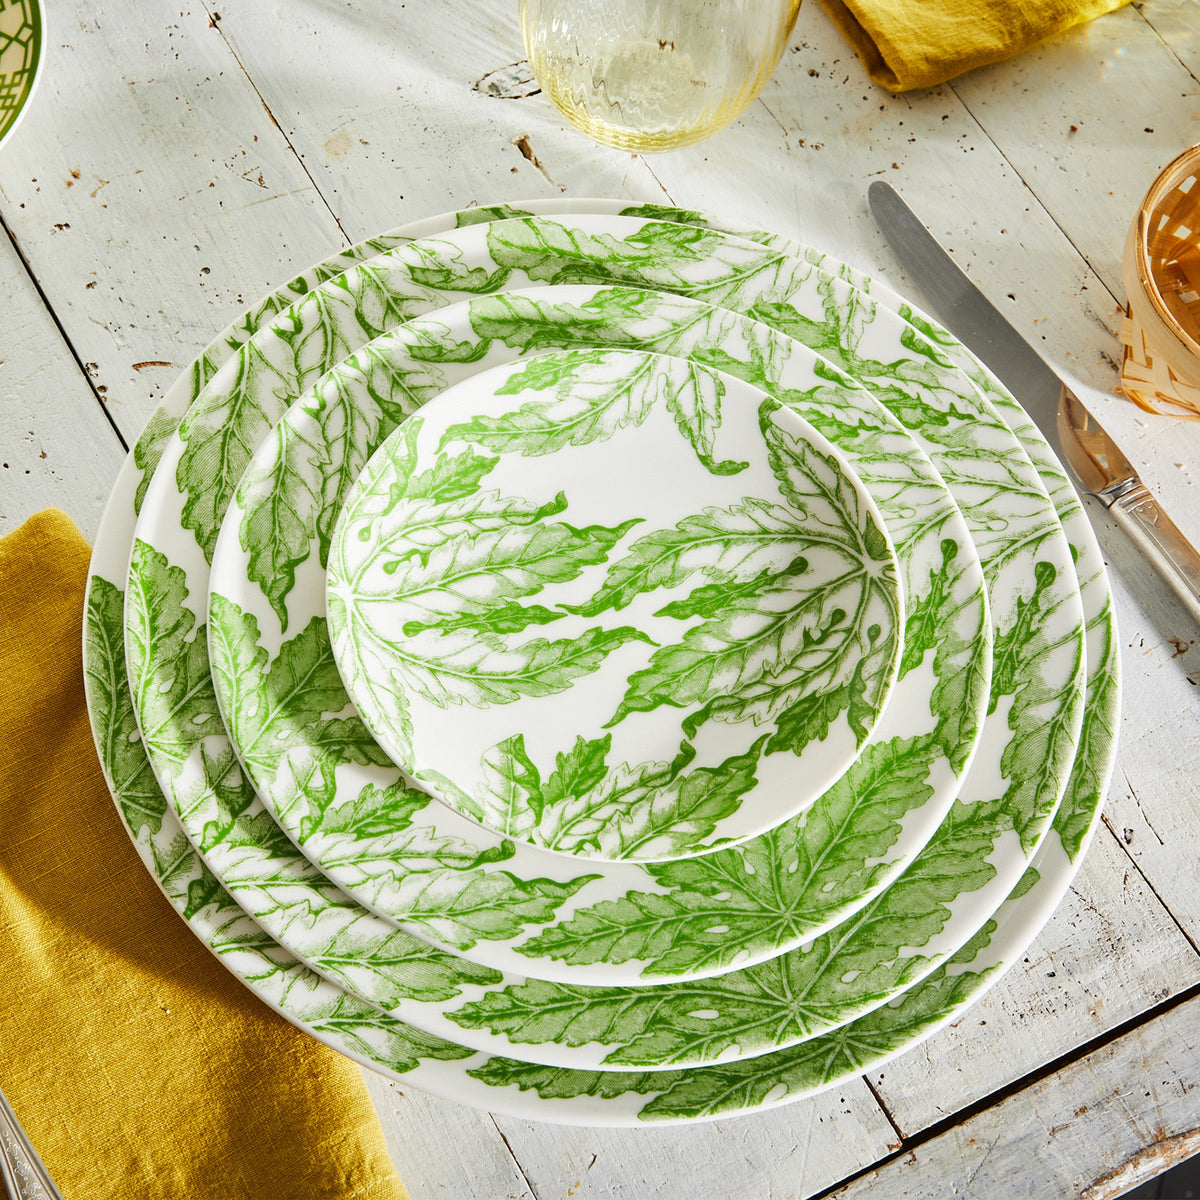 A set of Caskata Artisanal Home Freya Rimmed Charger Plates with green leaf patterns stacked on a rustic wooden table, accompanied by a yellow napkin, a knife, and glassware, exuding the charm of green florals.